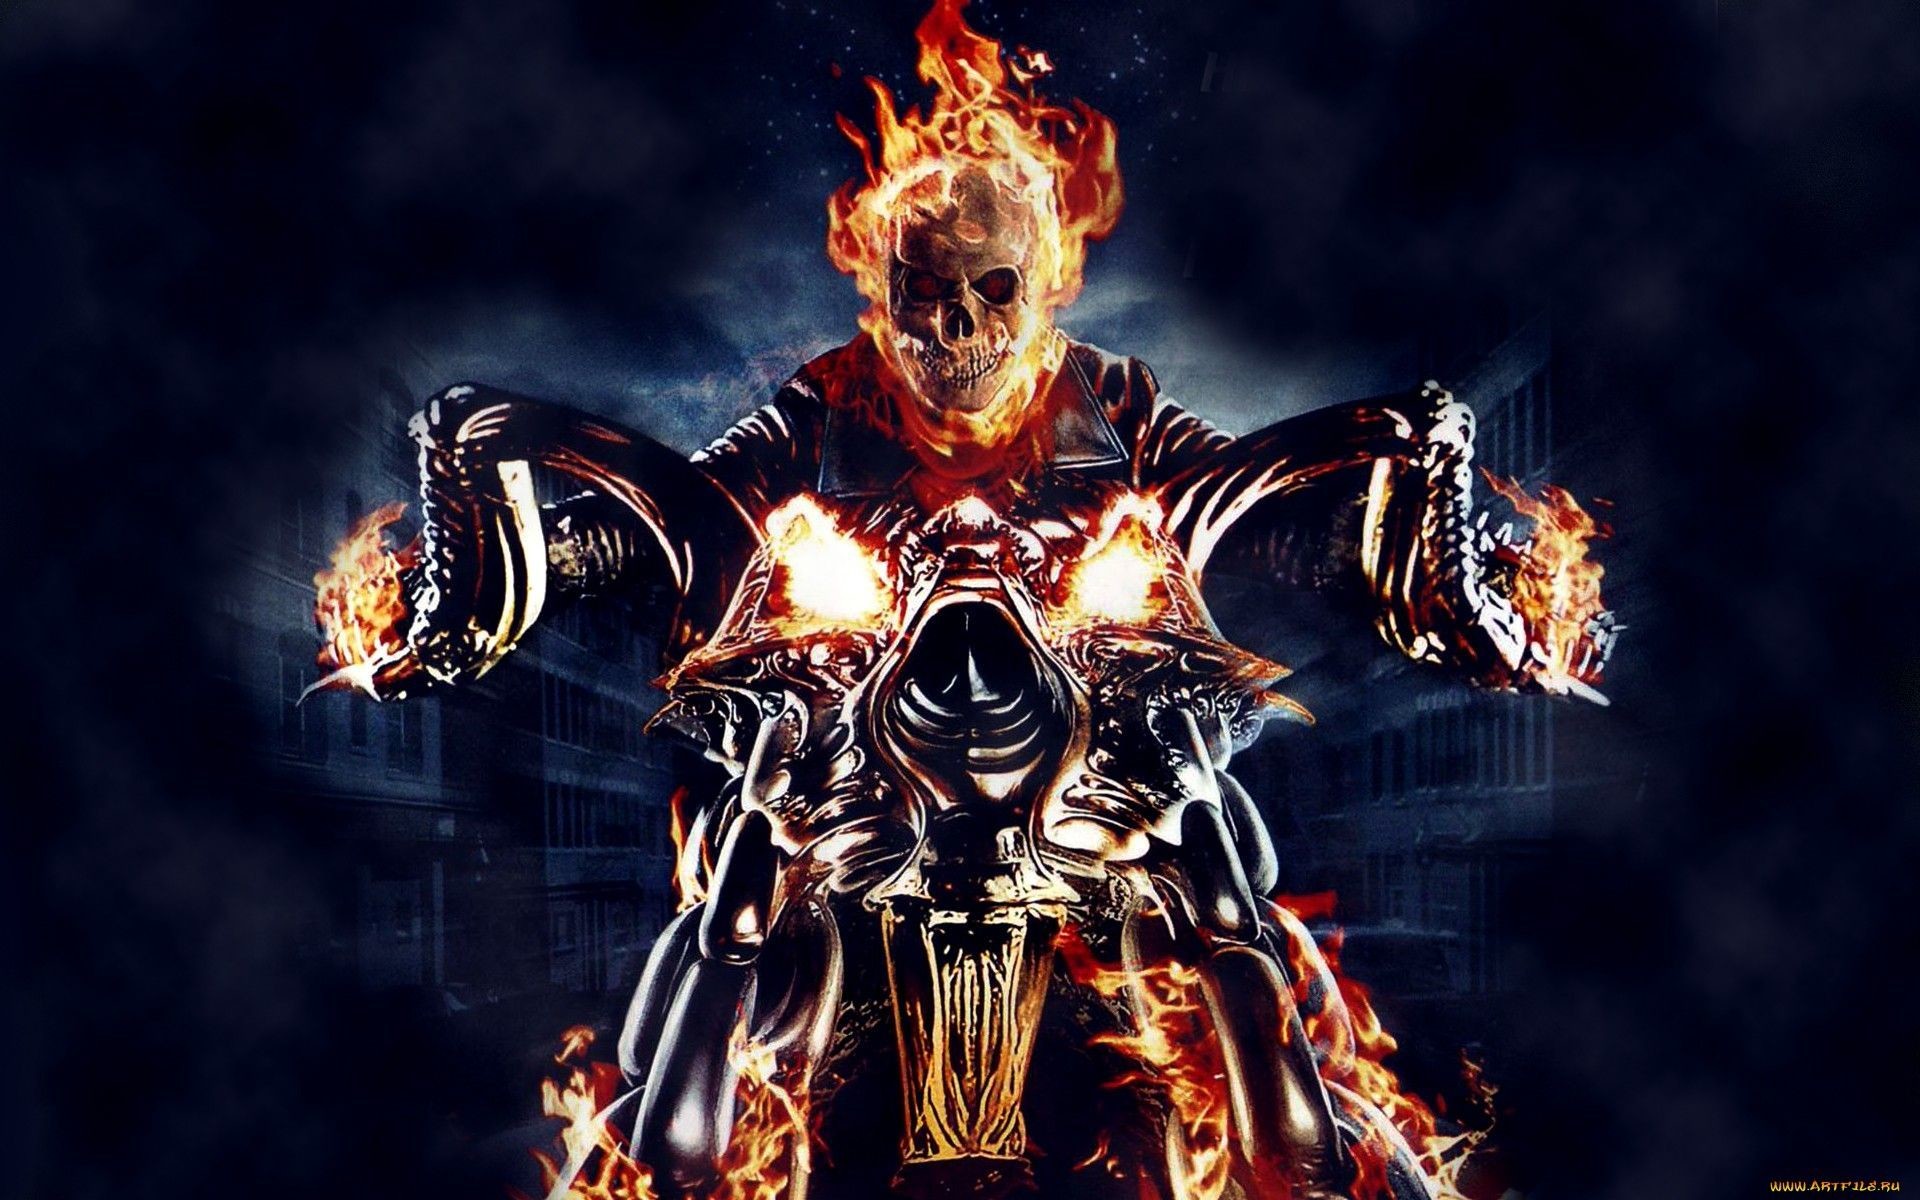 1920x1200 Collection of Ghost Rider Wallpaper Free Download on HDWallpapers 480Ã800  Ghost Rider 2 Wallpapers